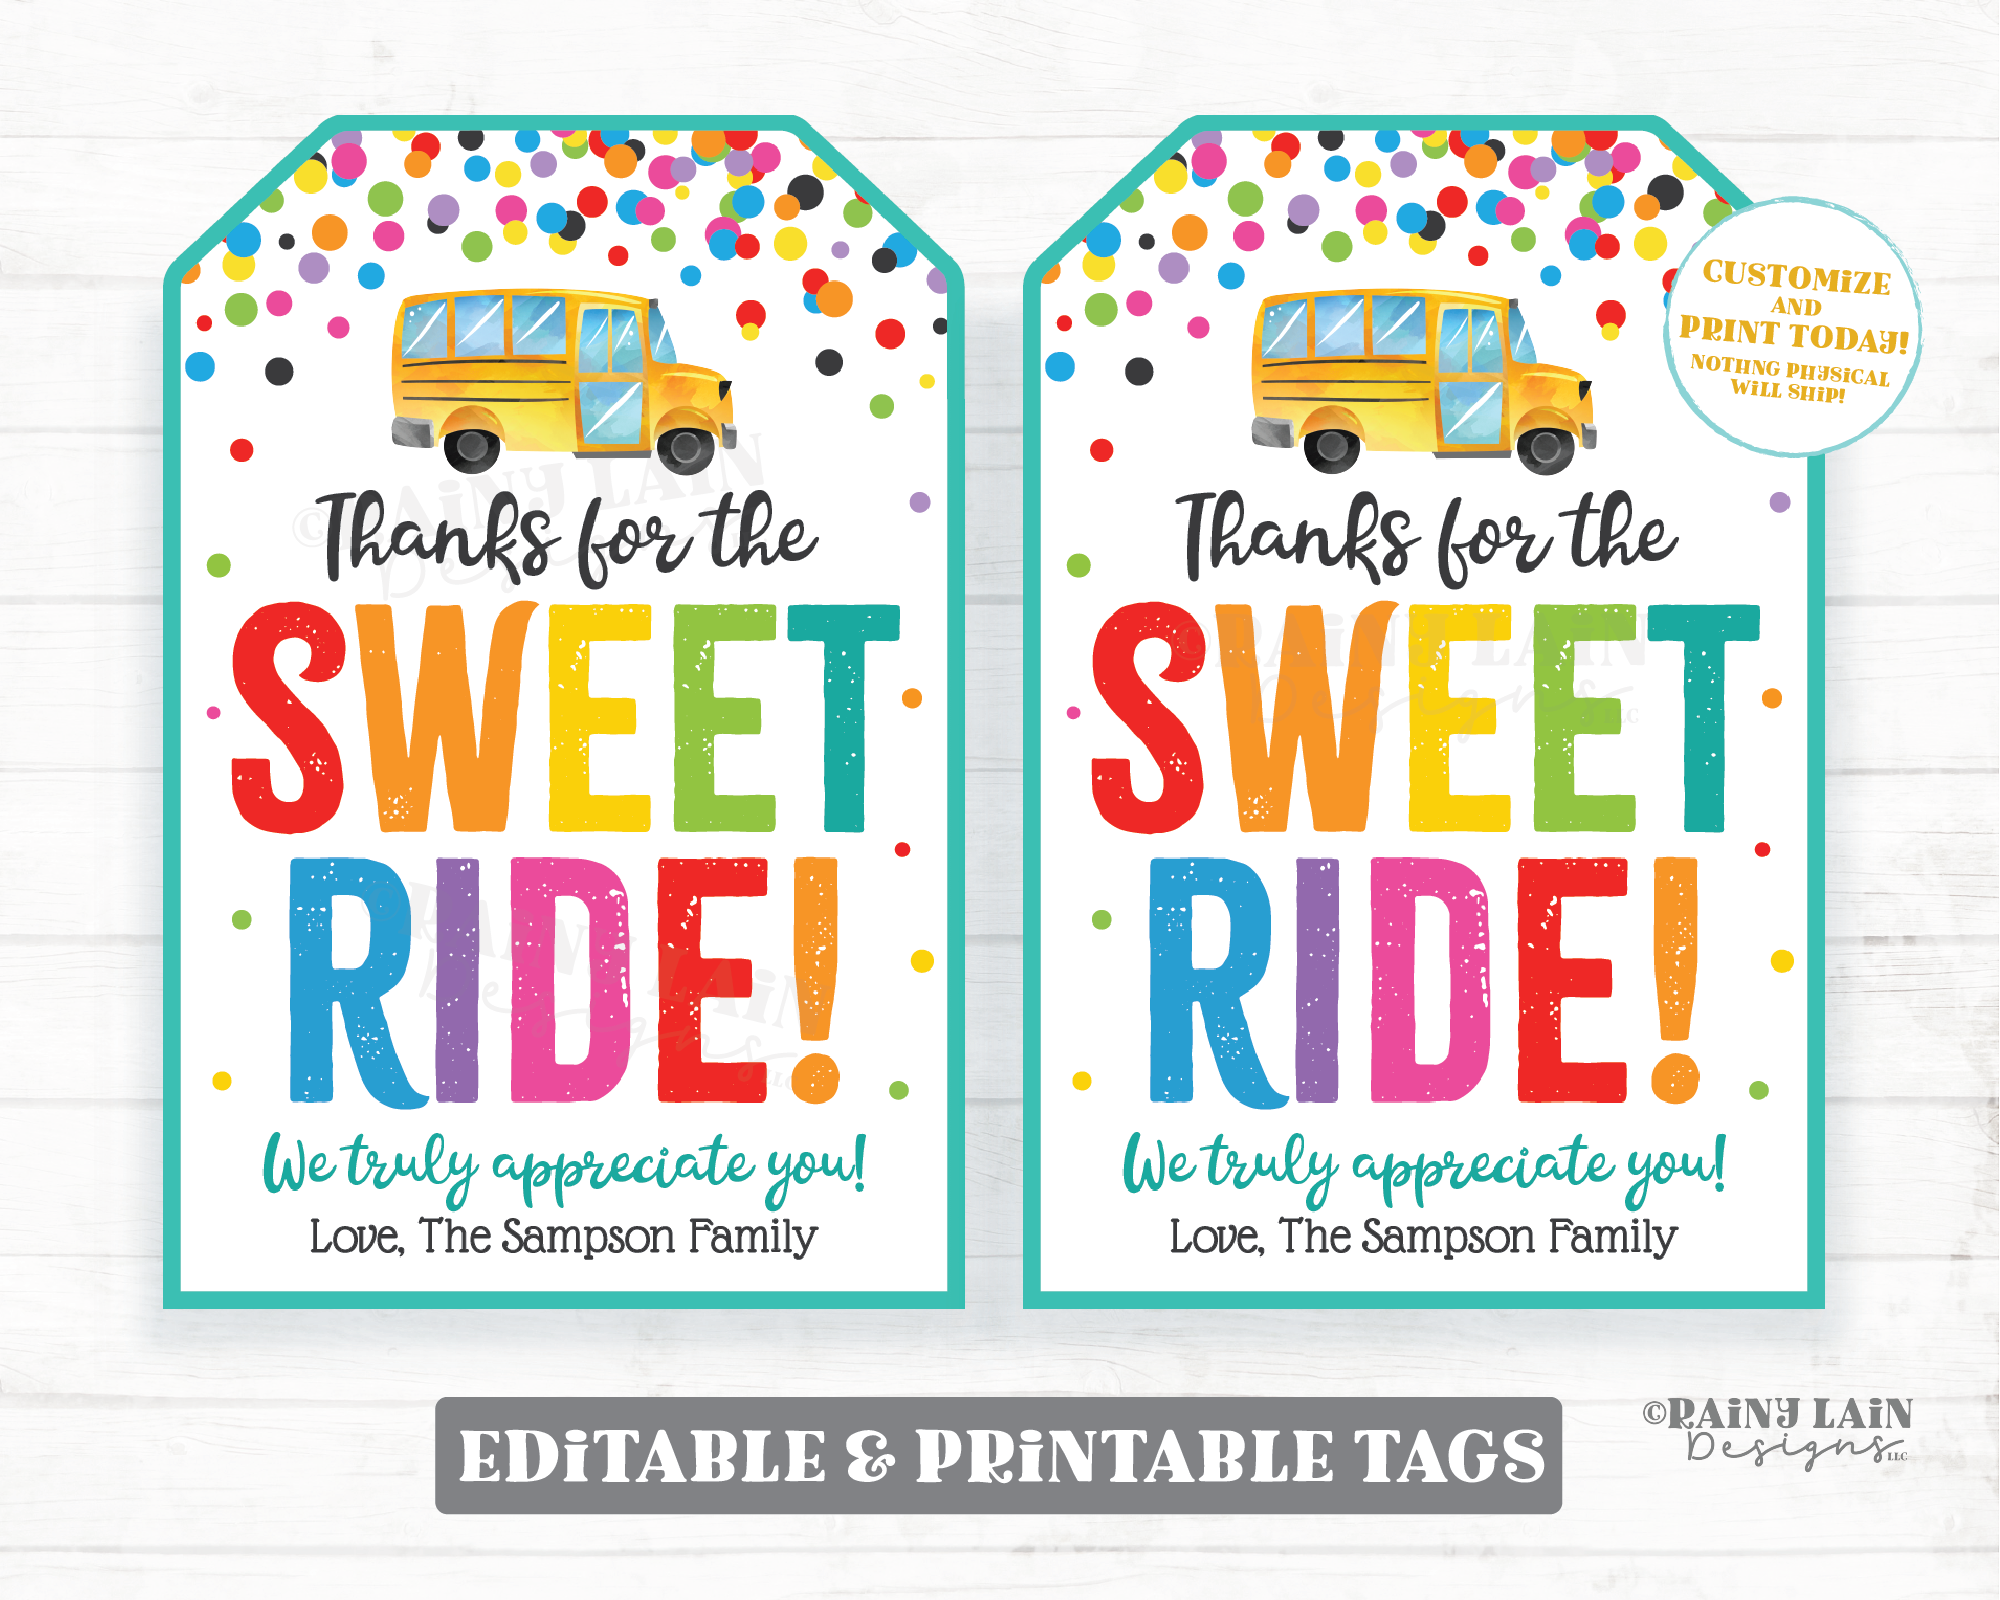 Bus Driver Gift Tag Thanks for the Sweet Ride National School Bus Drivers Day Wheelie Appreciate Transportation Appreciation Thank you PTO